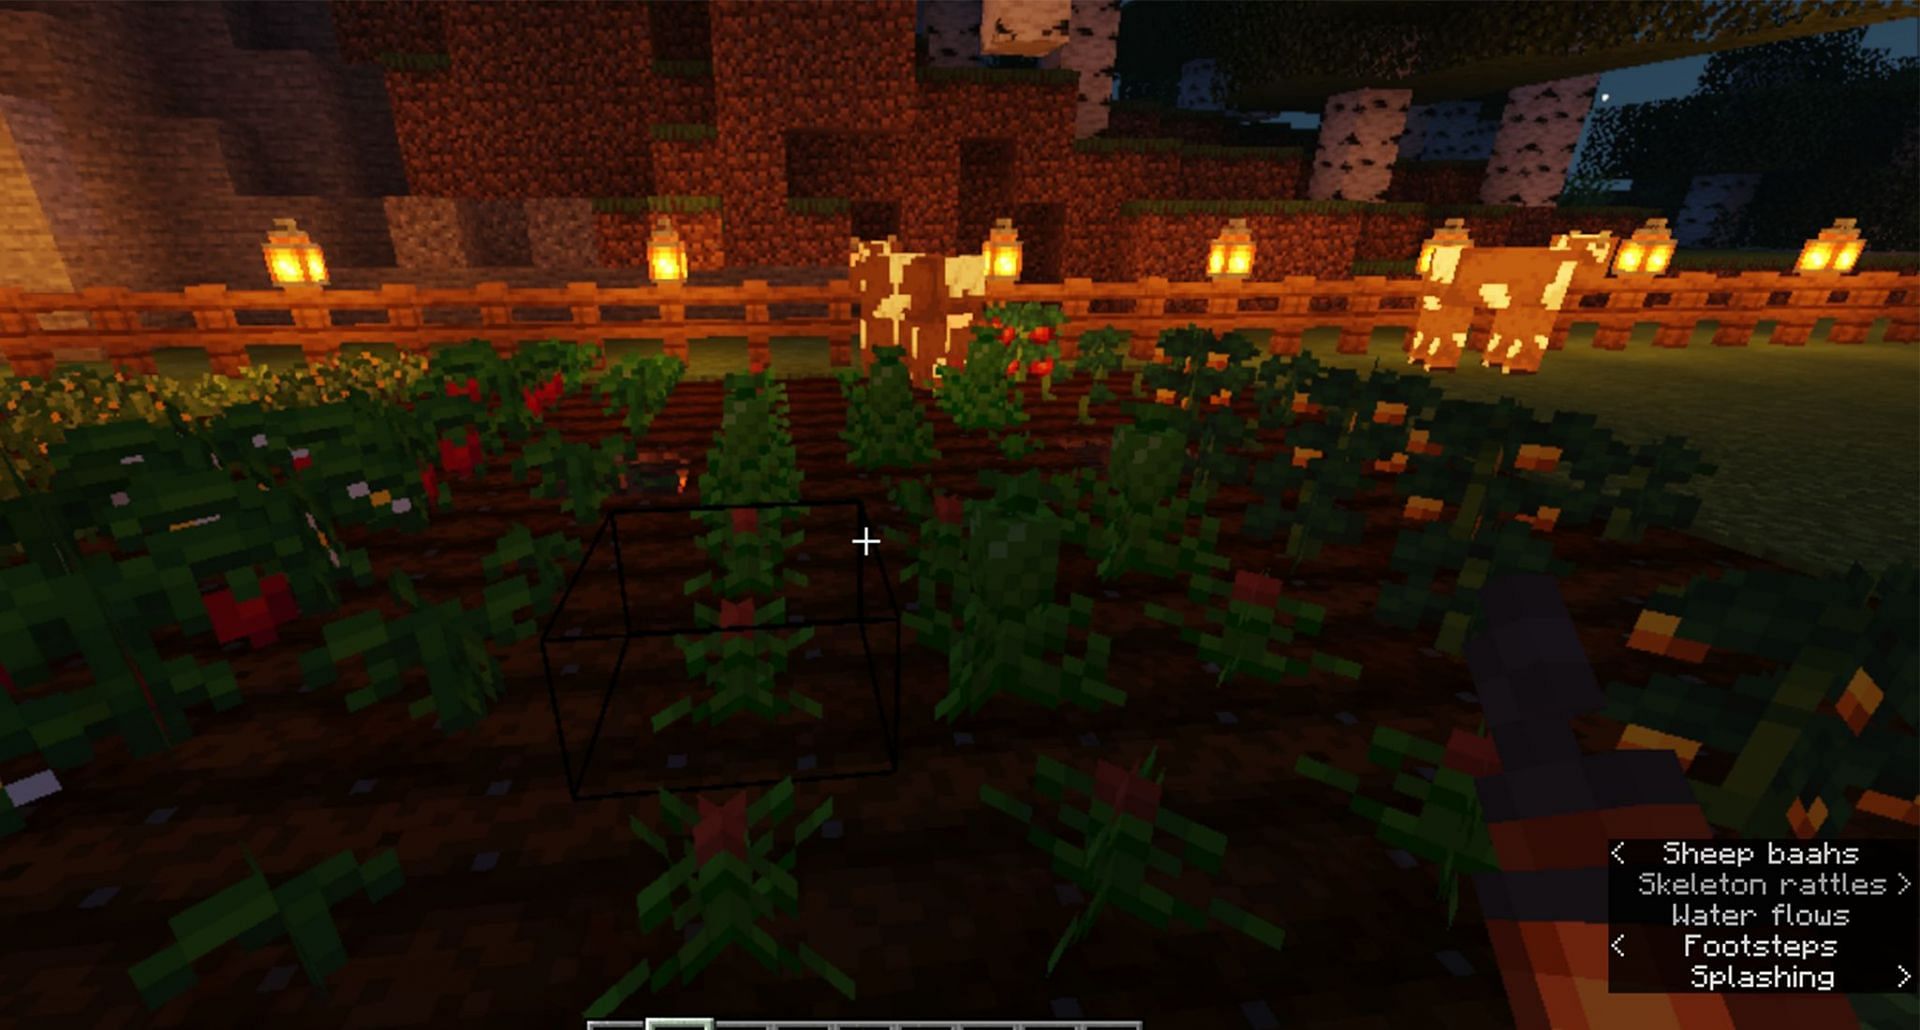 The Veggie Way mod allows players to grow cotton, corn, and more (Image via Spectre Raider)